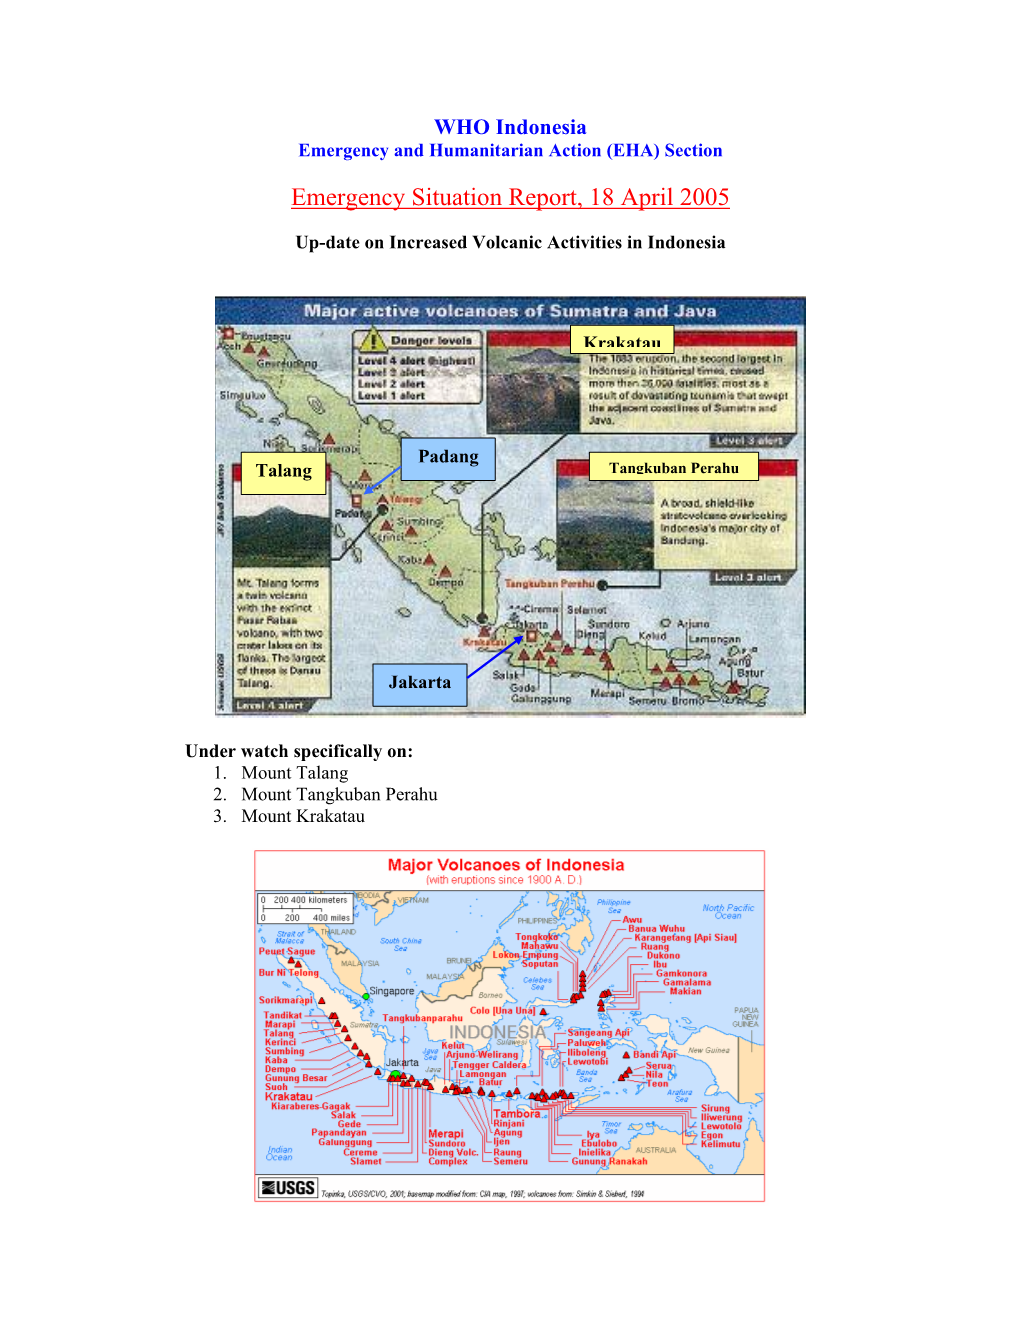 Emergency Situation Report, 18 April 2005